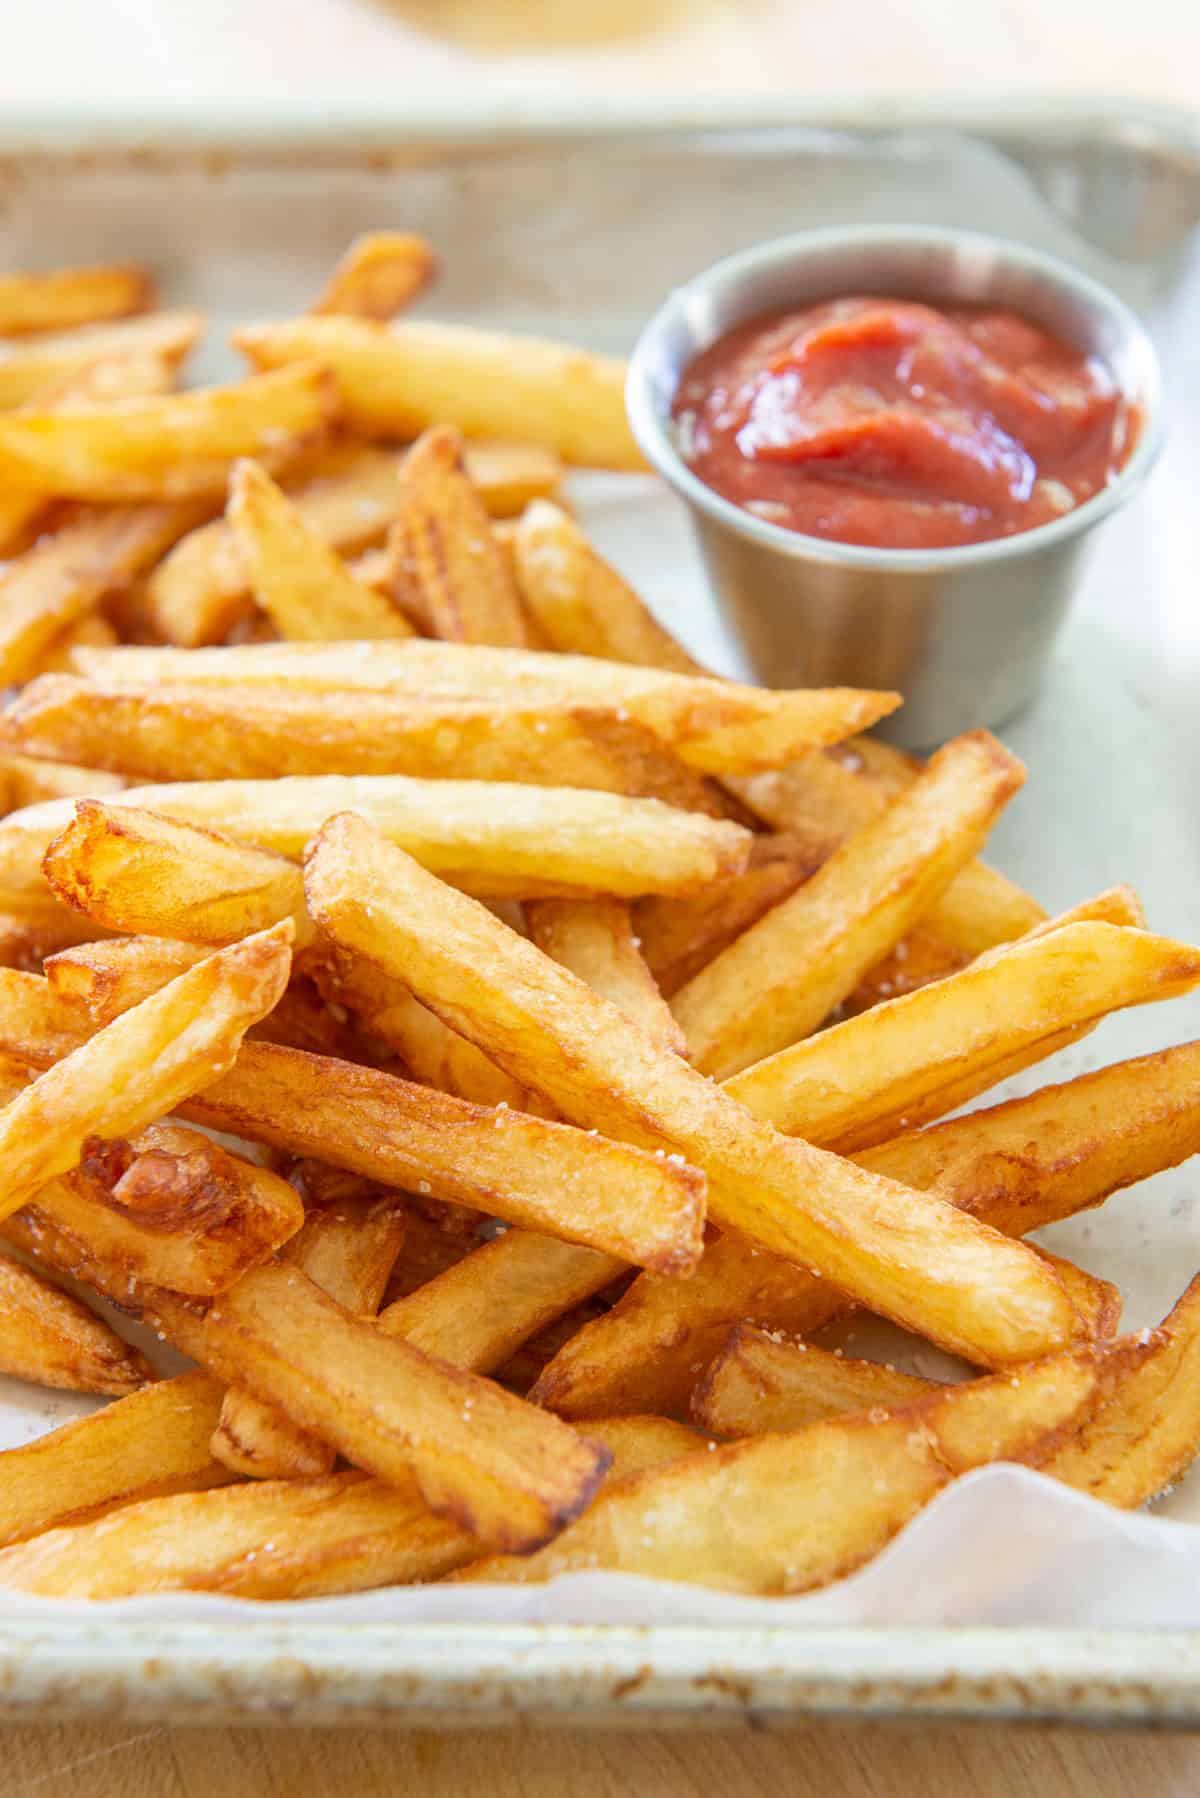 A Pile of French Fries On a Tray